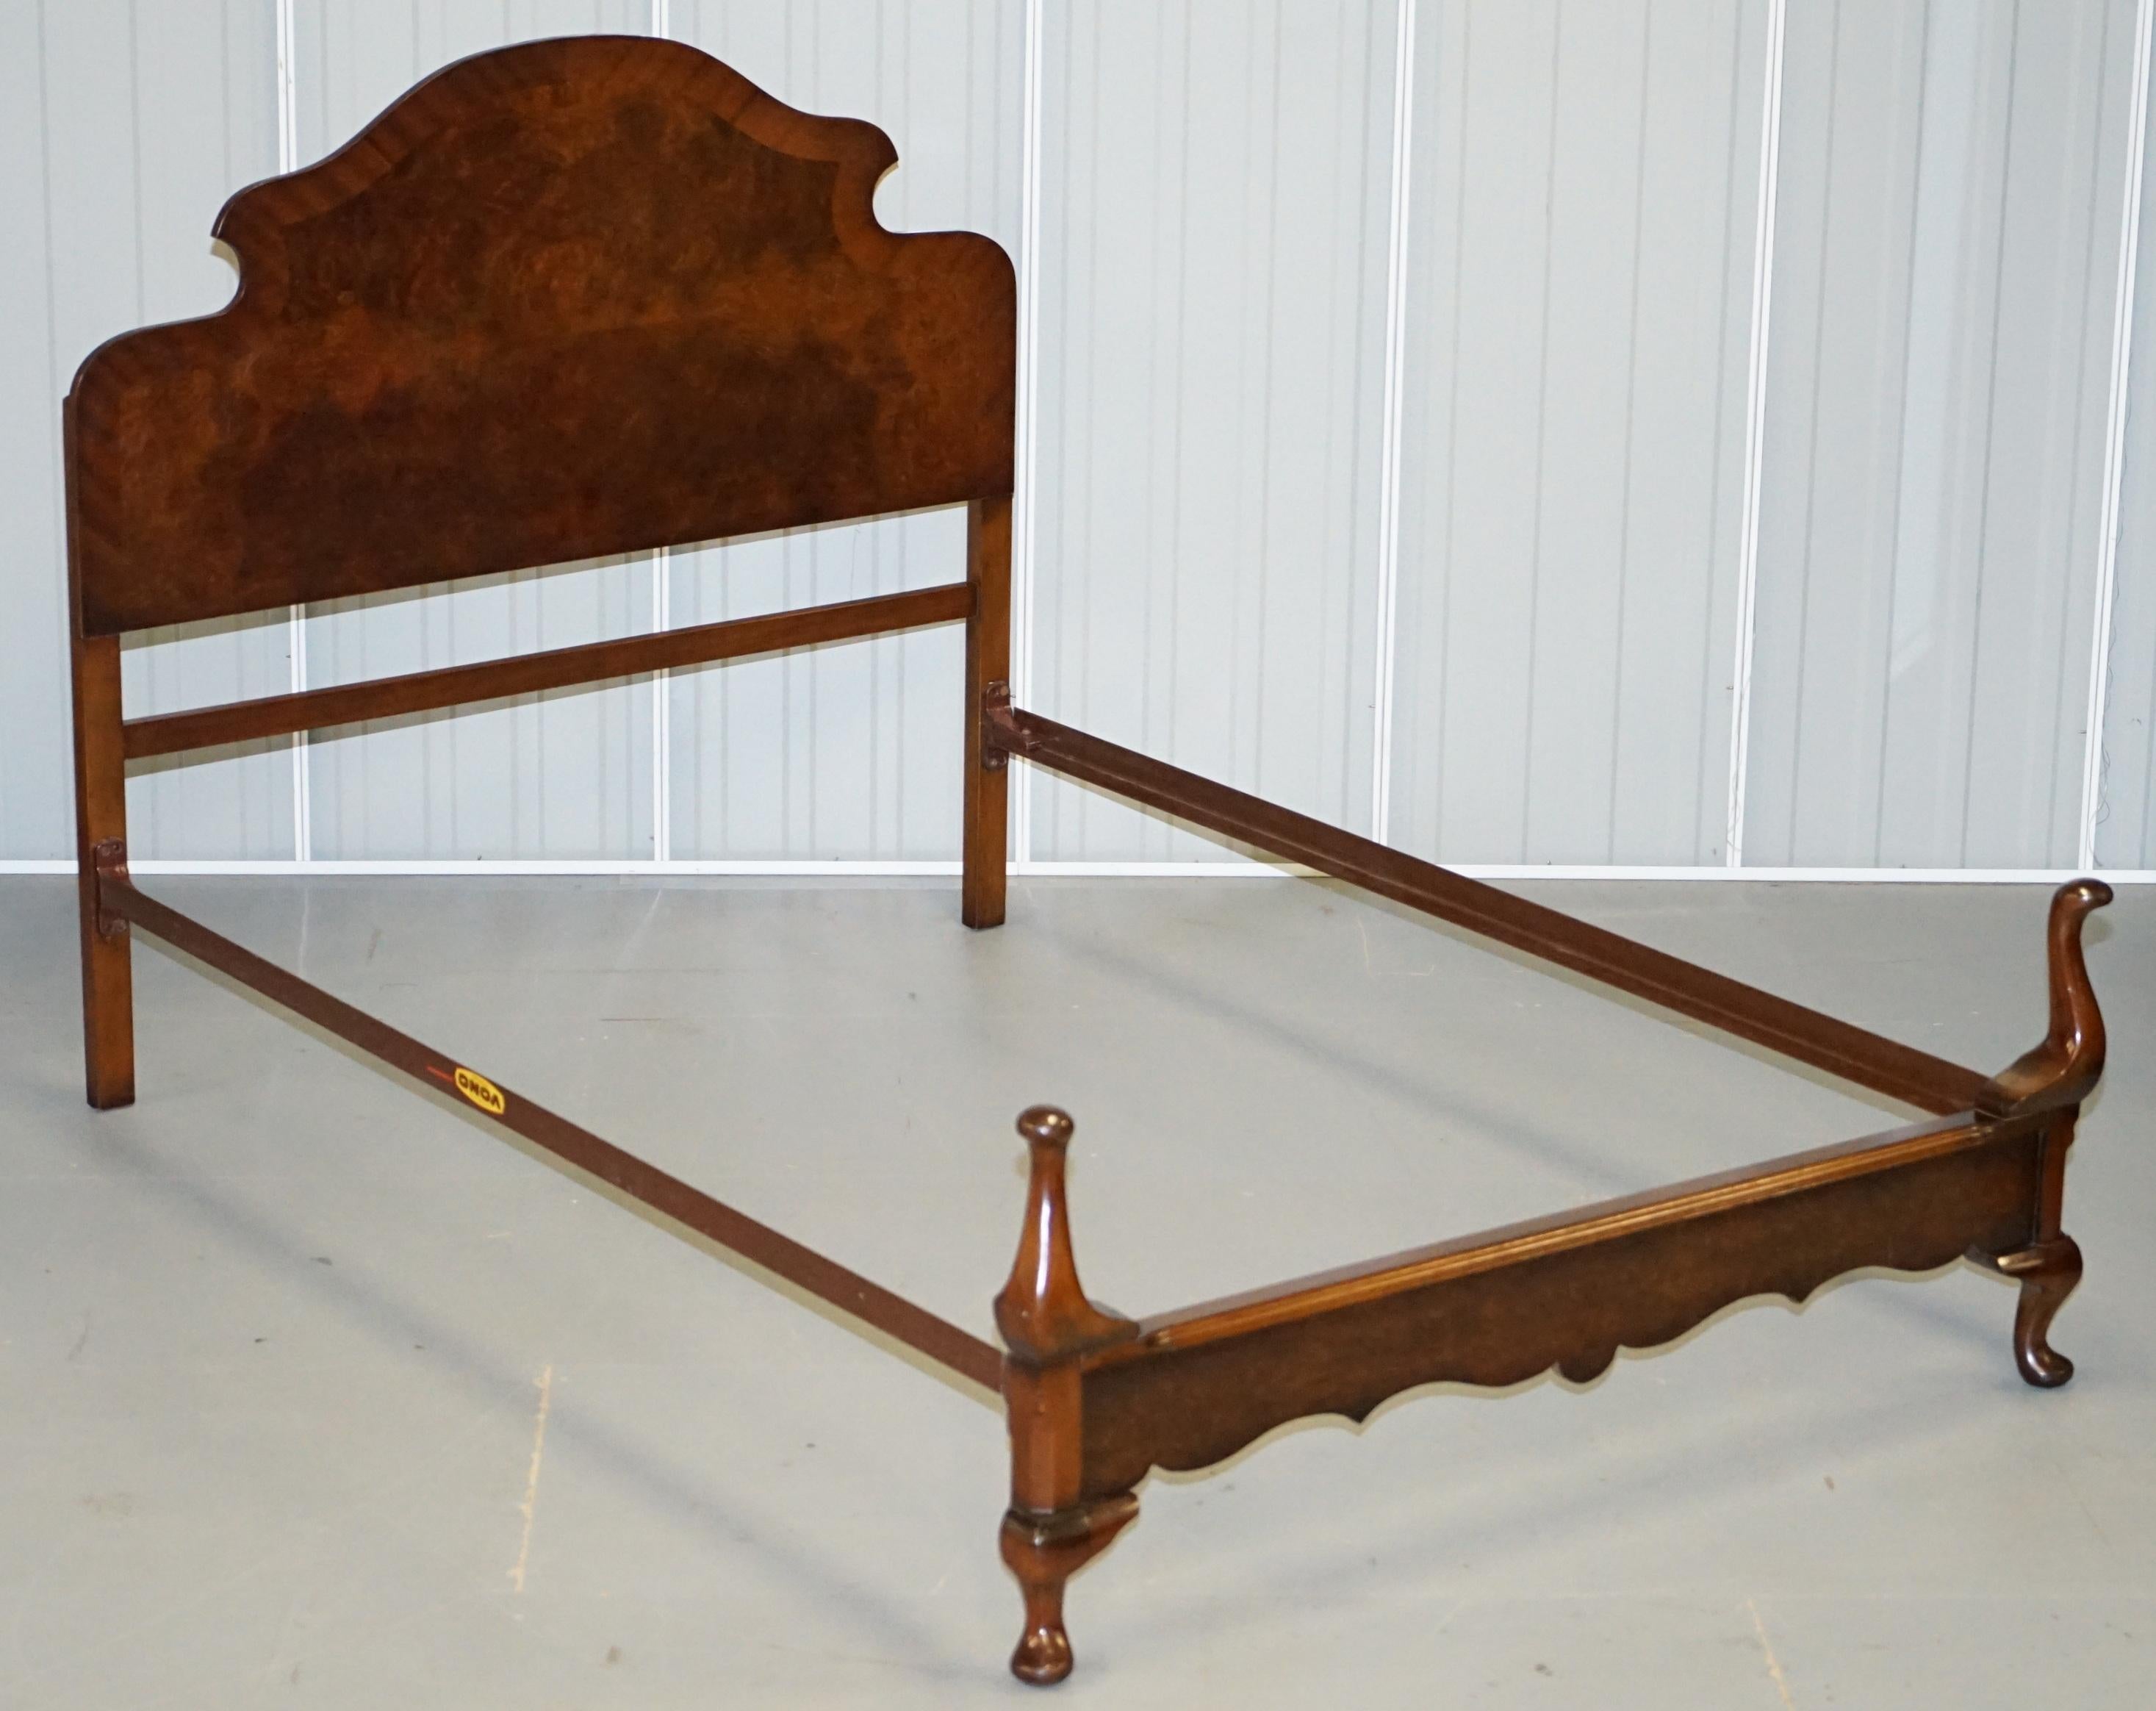 We are delighted to offer for sale this lovely original 1880-1900 Victorian flamed mahogany double bed frame or bedstead

This one is in very good order, it’s a popular Victorian style with double cabriolet legs, the frame is all mahogany, they